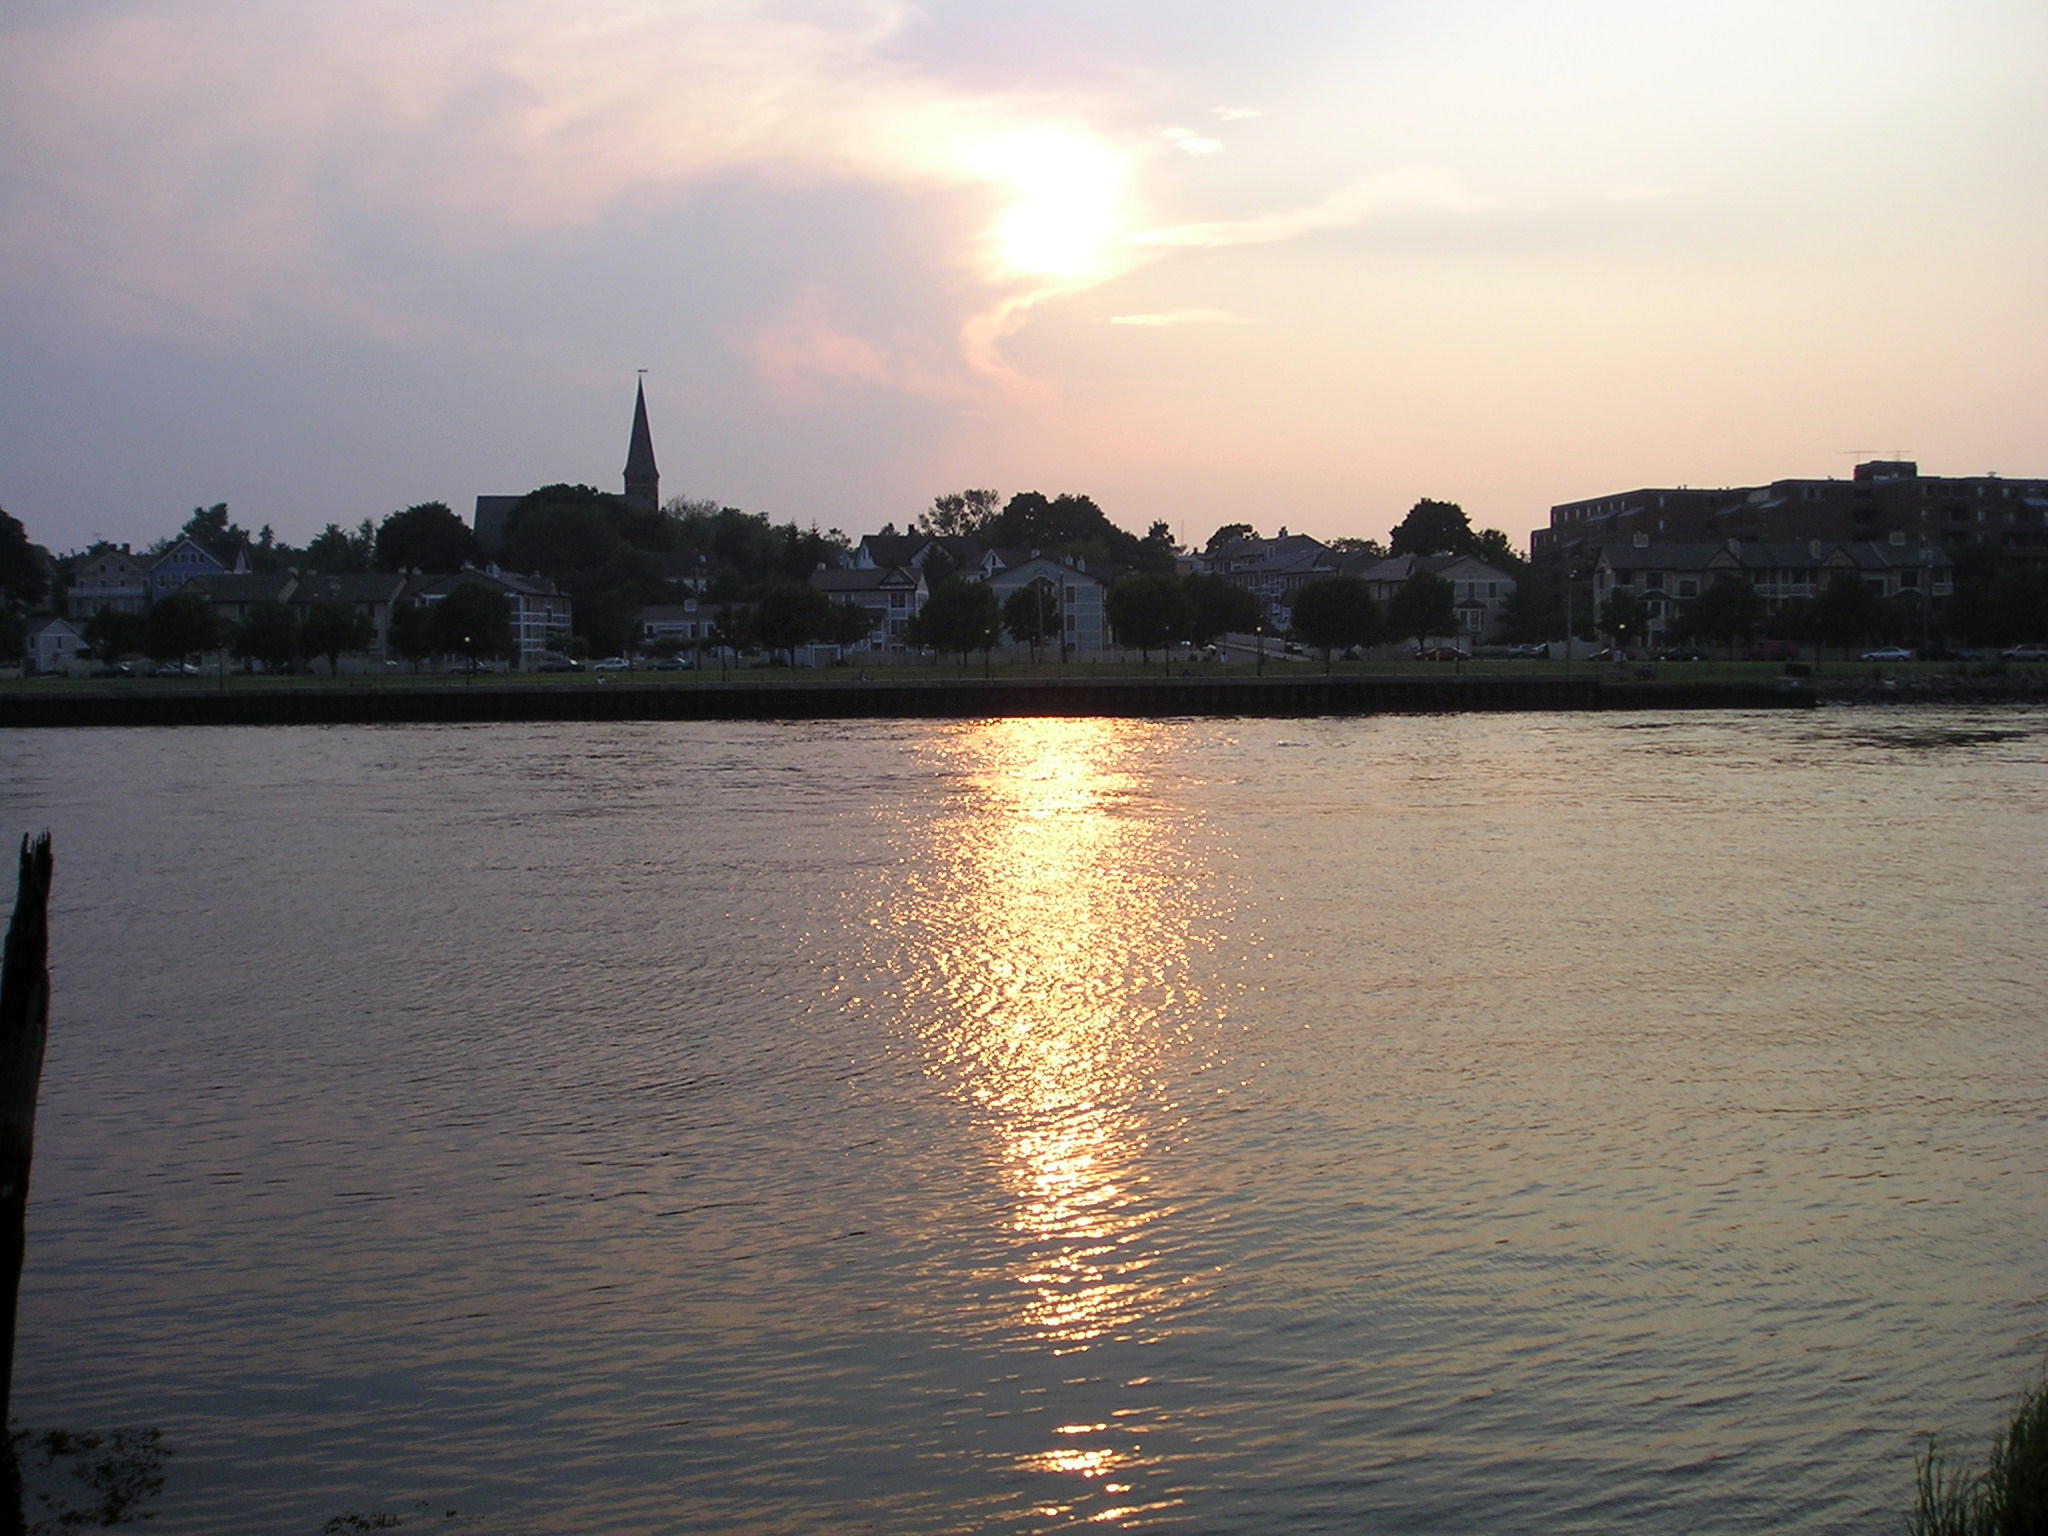 Sunset on the Quinnipiac River (user submitted)